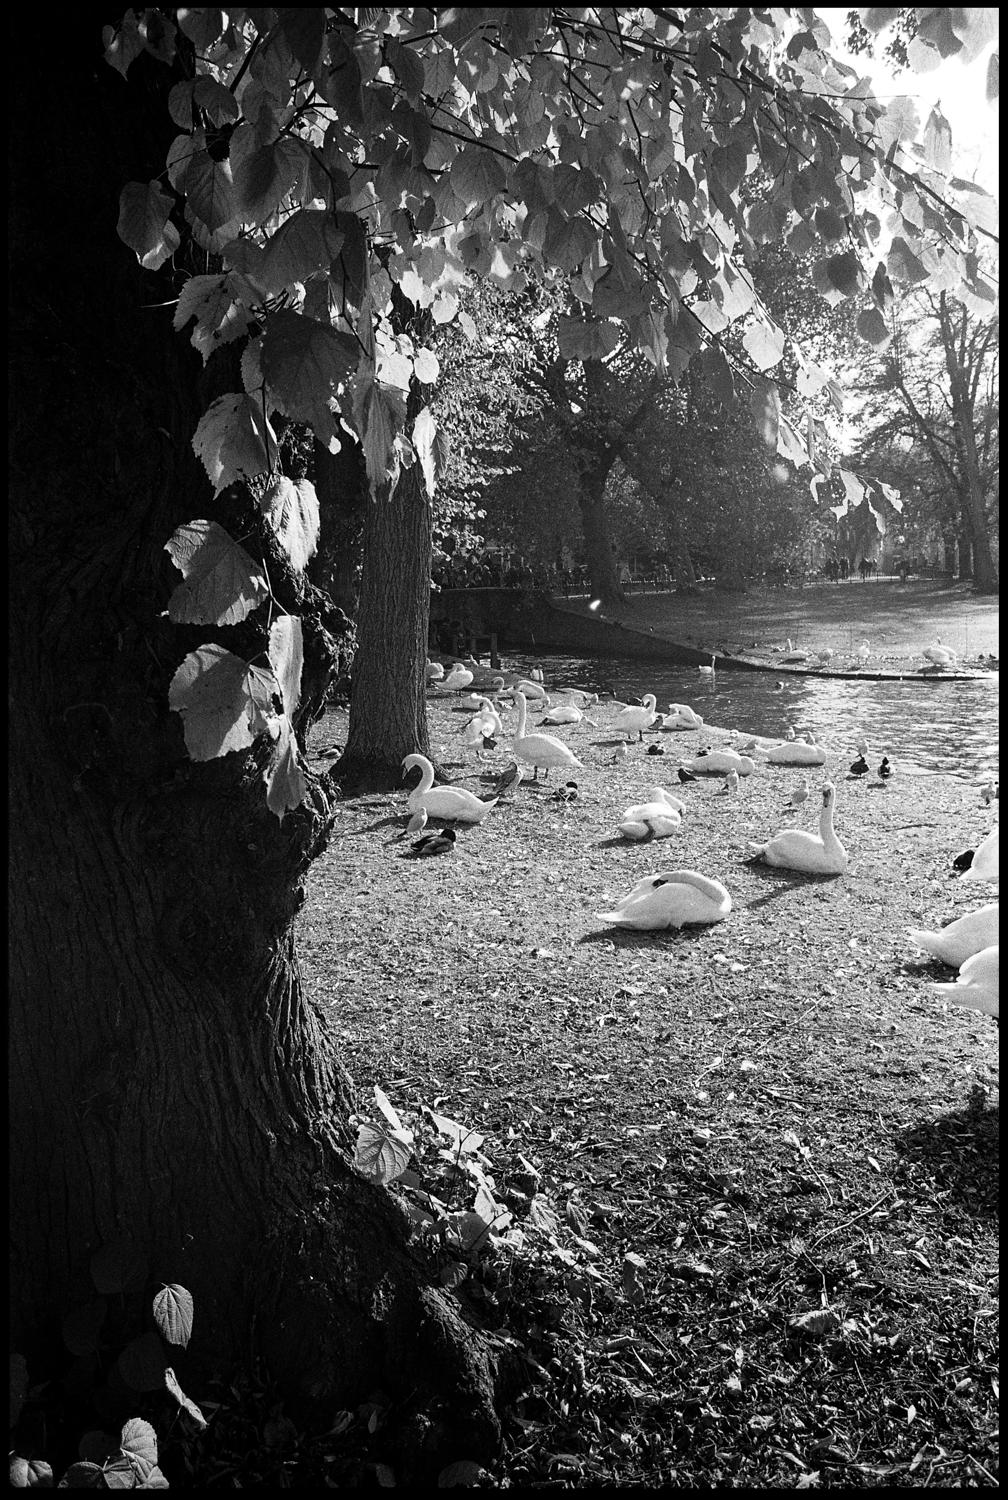 Paul Cooklin Black and White Photograph - Edition 1/10 - Swans, Bruges, Belgium, Silver Gelatin Photograph